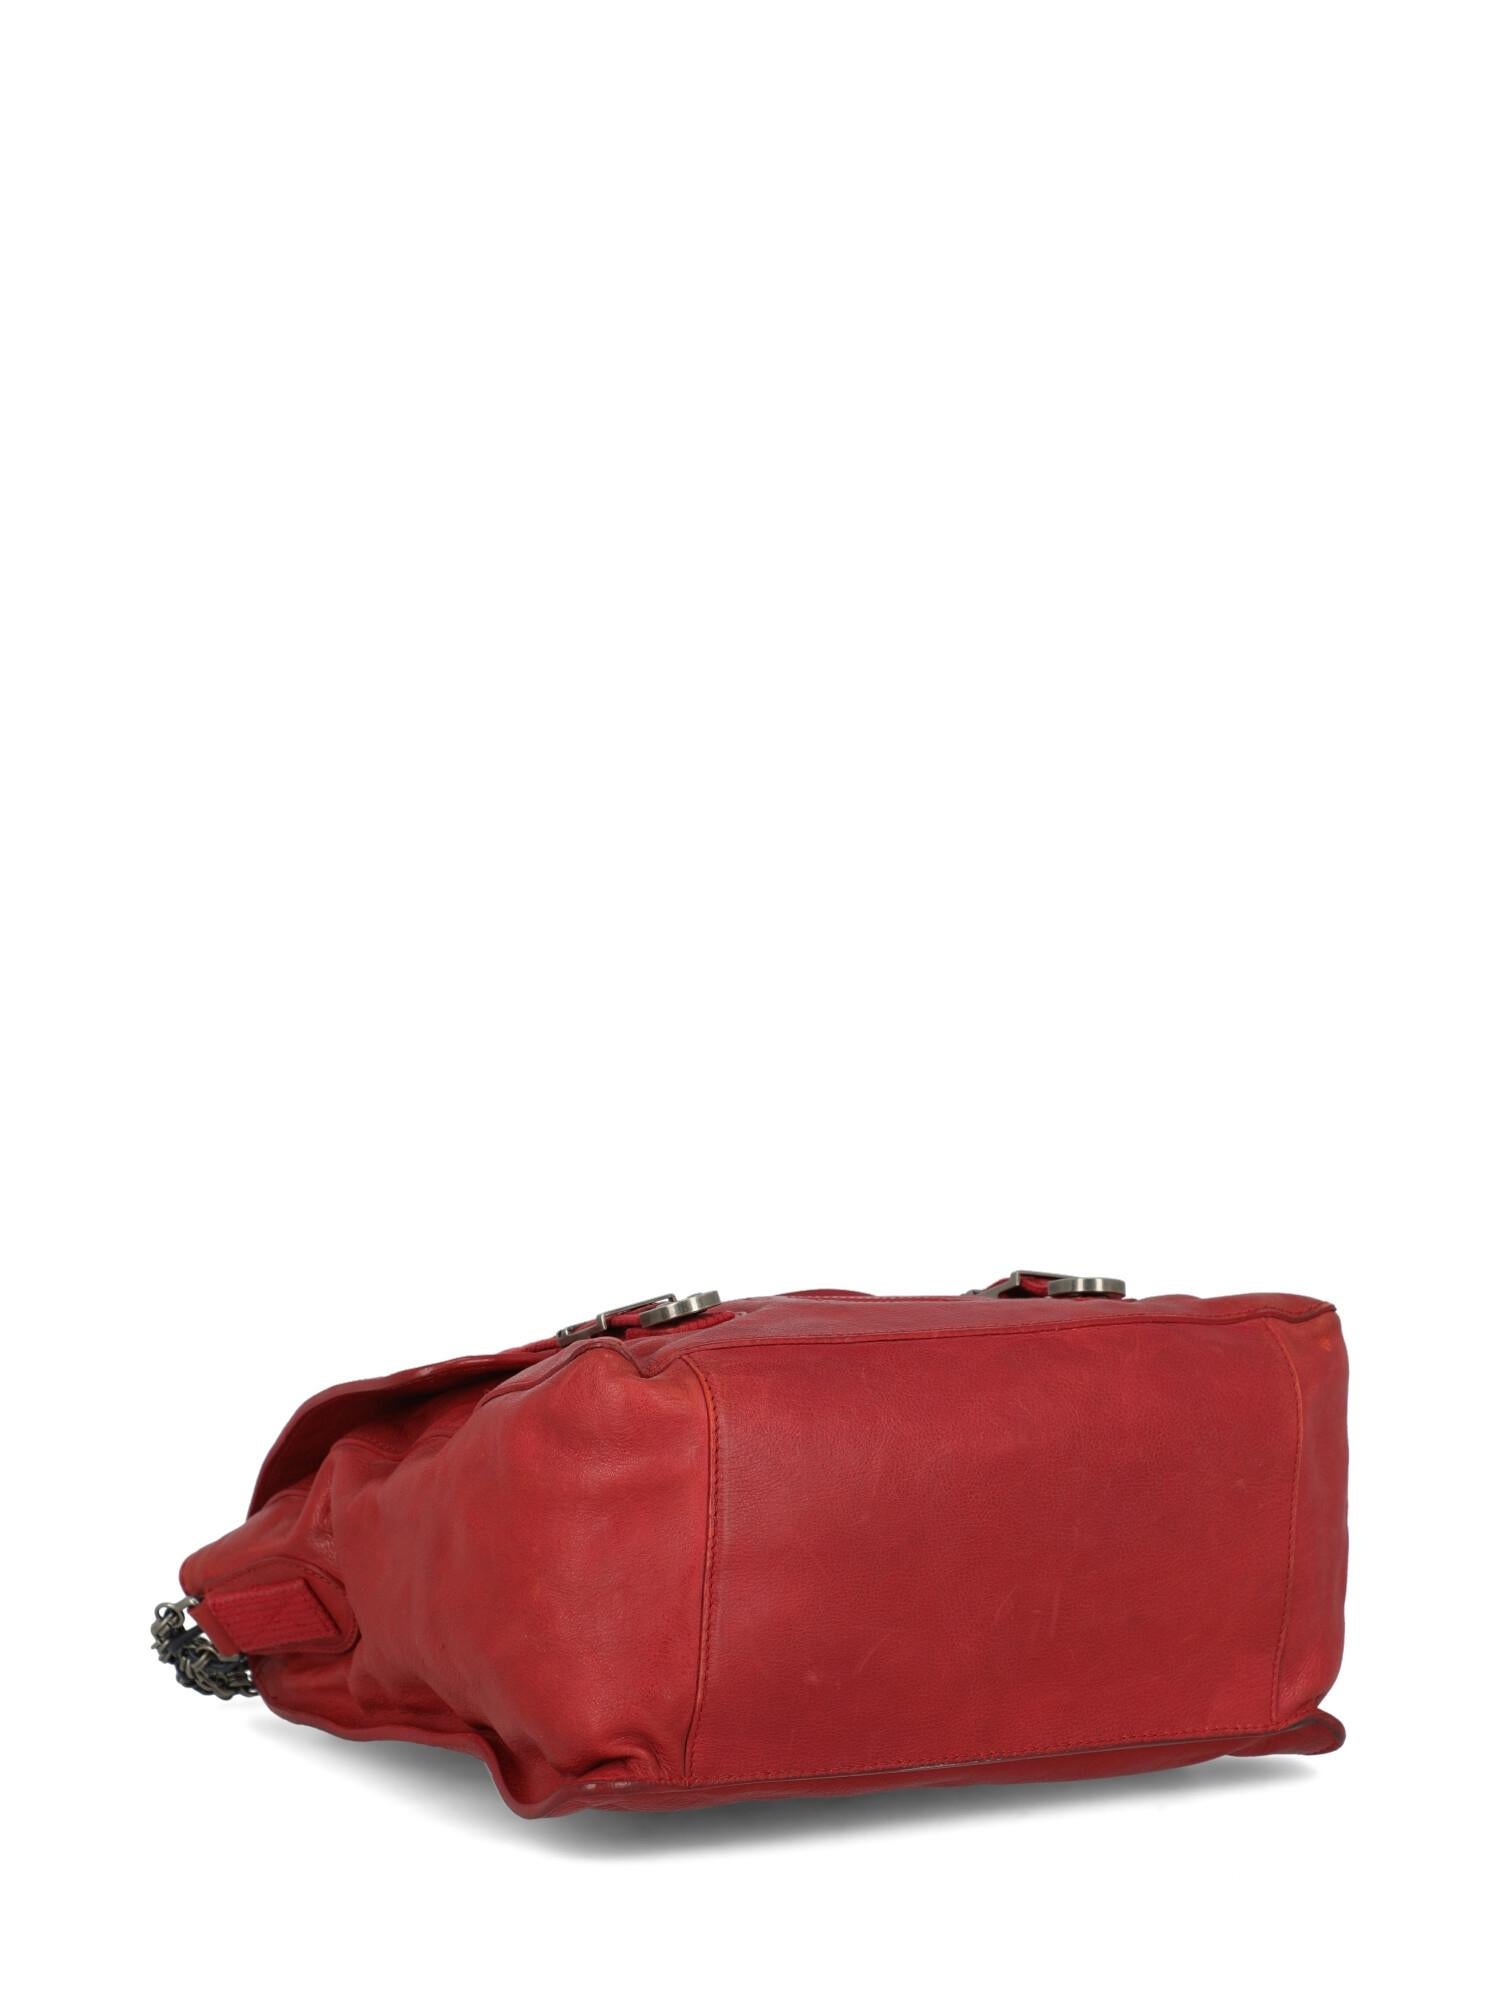 Balenciaga Woman Shoulder bag Red Leather For Sale 1